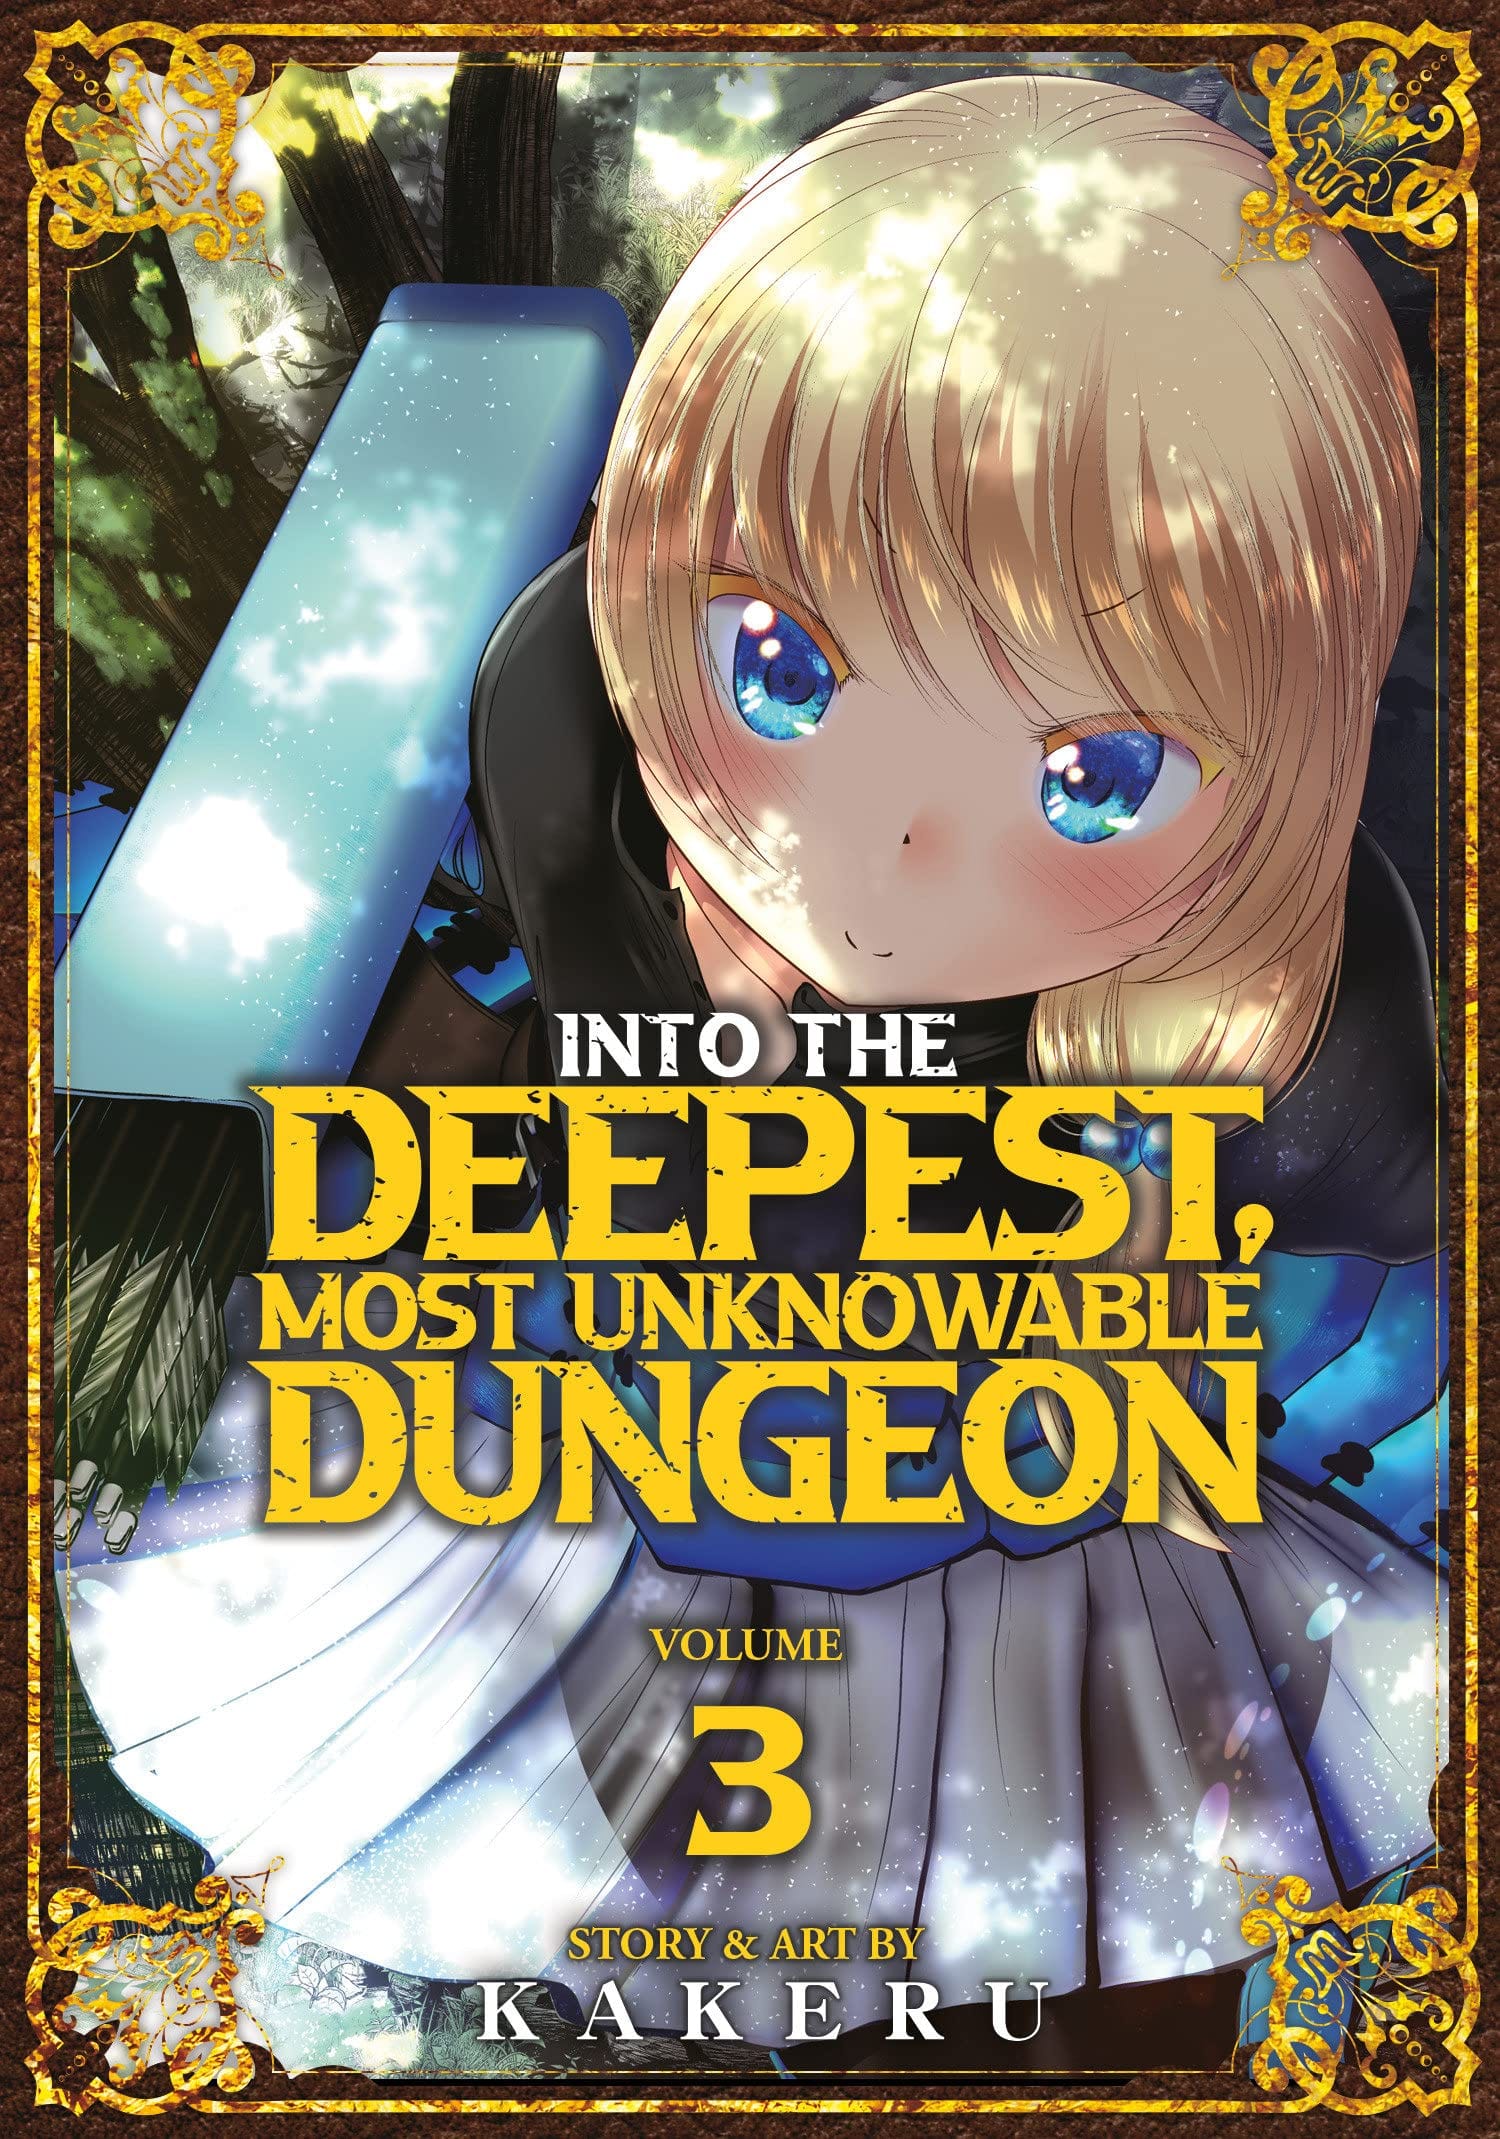 Into the Deepest Most Unknowable Dungeon Vol. 3 - Third Eye